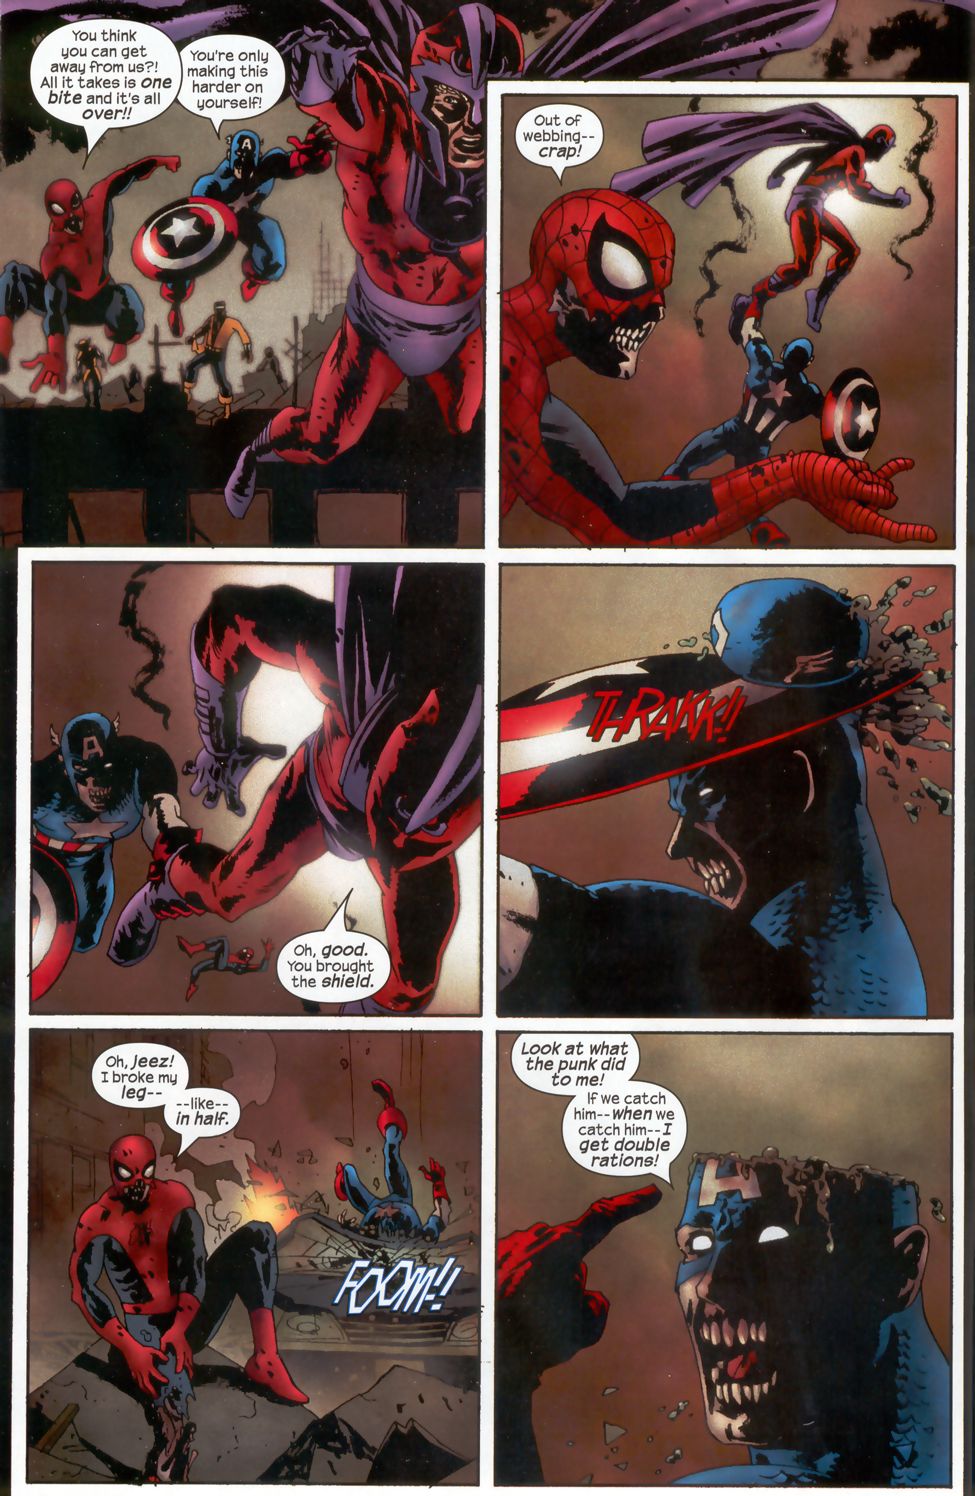 Marvel Zombies 1, Part 1 of 5